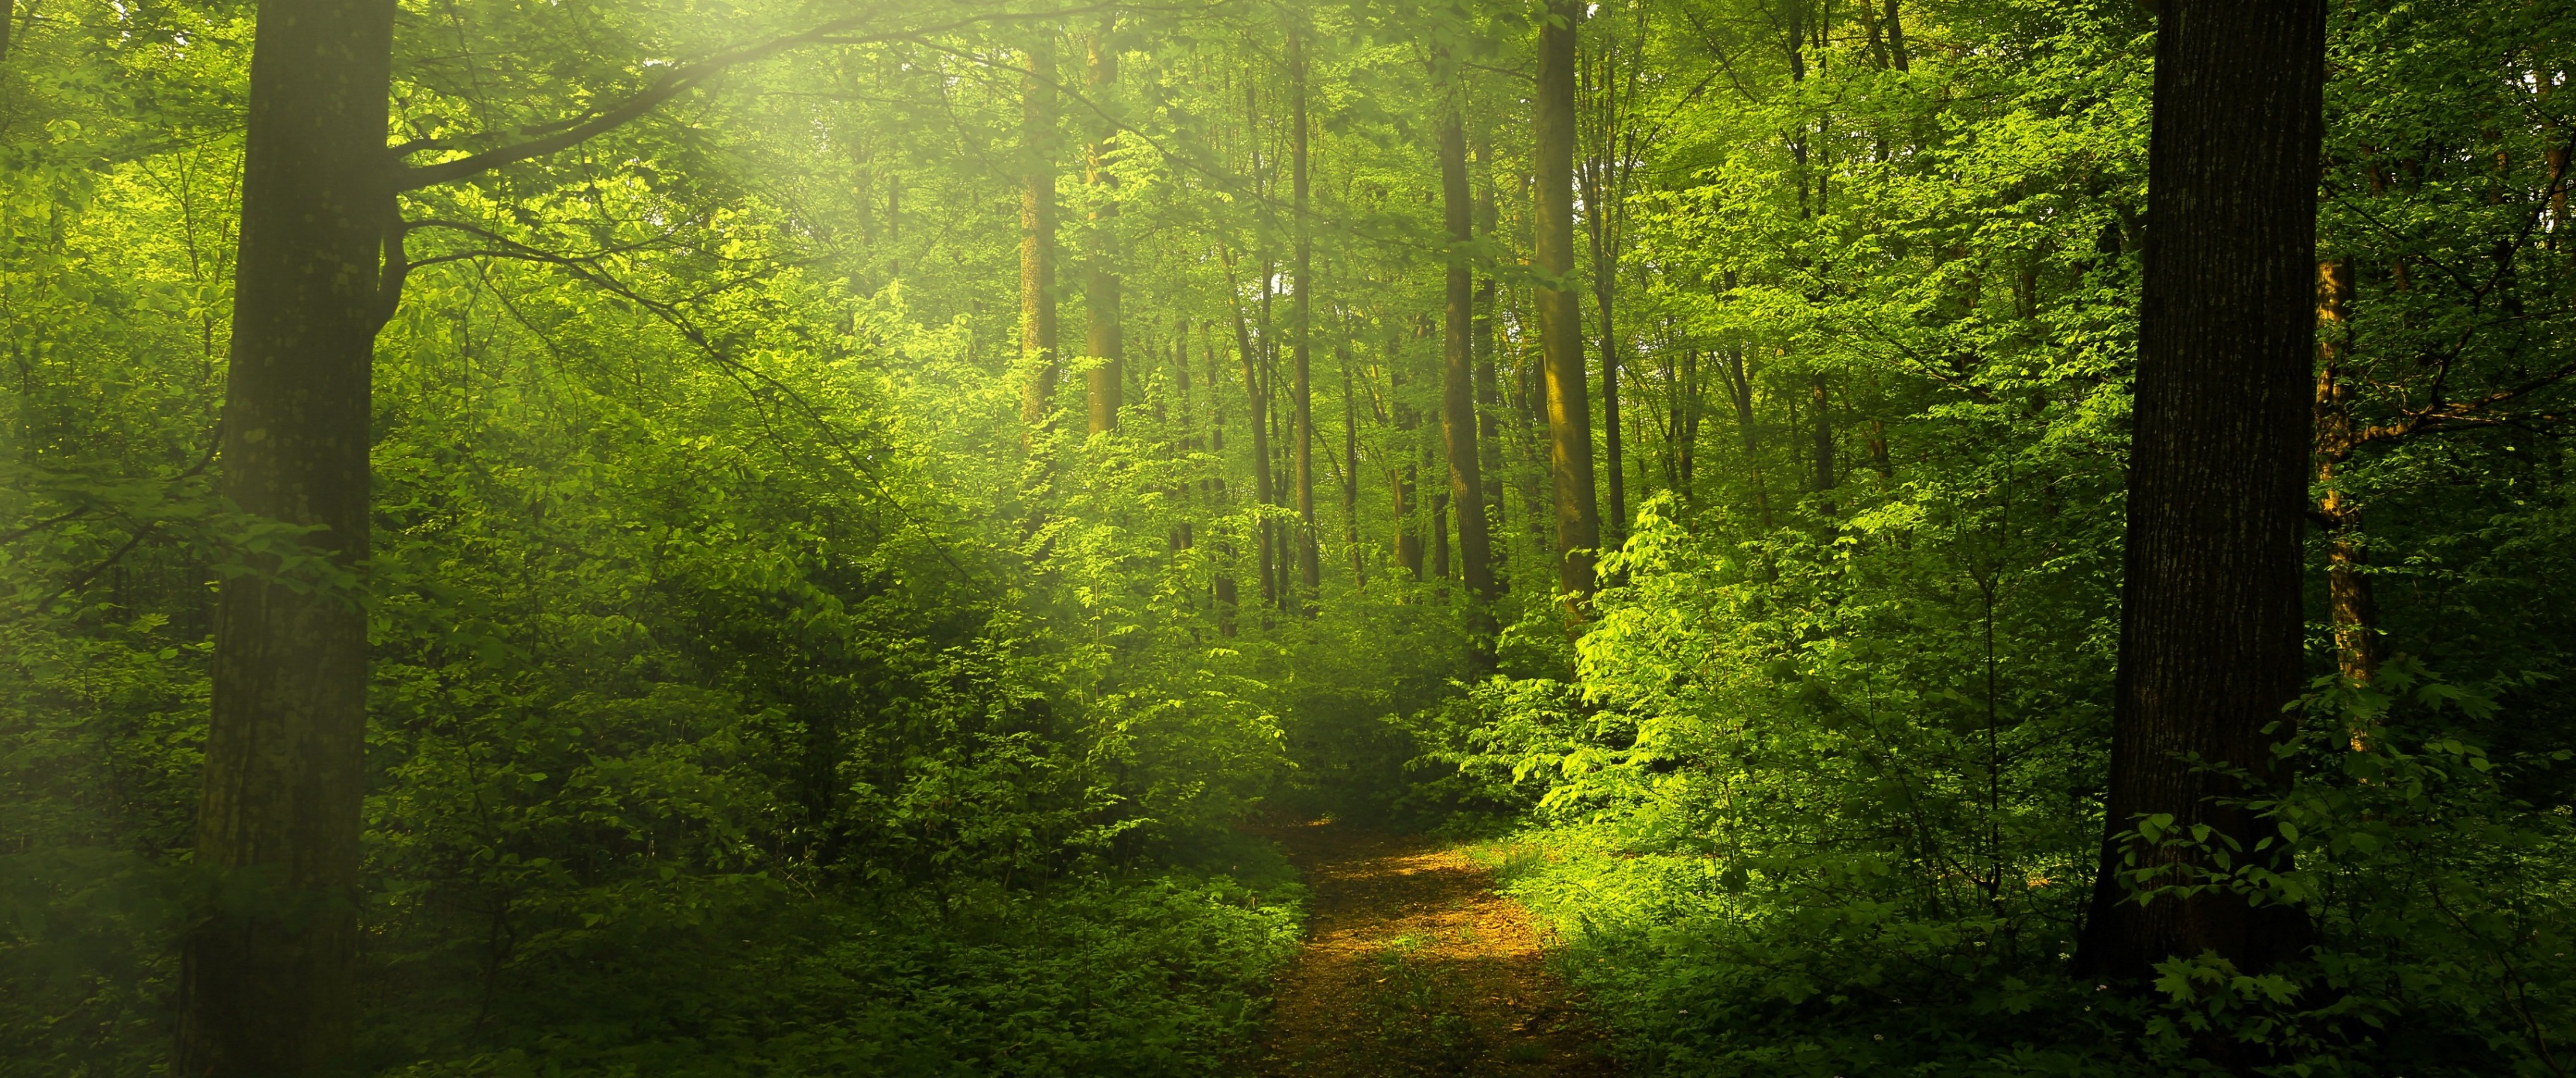 Green Forest Wallpaper 4K, Woods, Trails, Pathway, Sun rays, Glade, Scenery, Nature